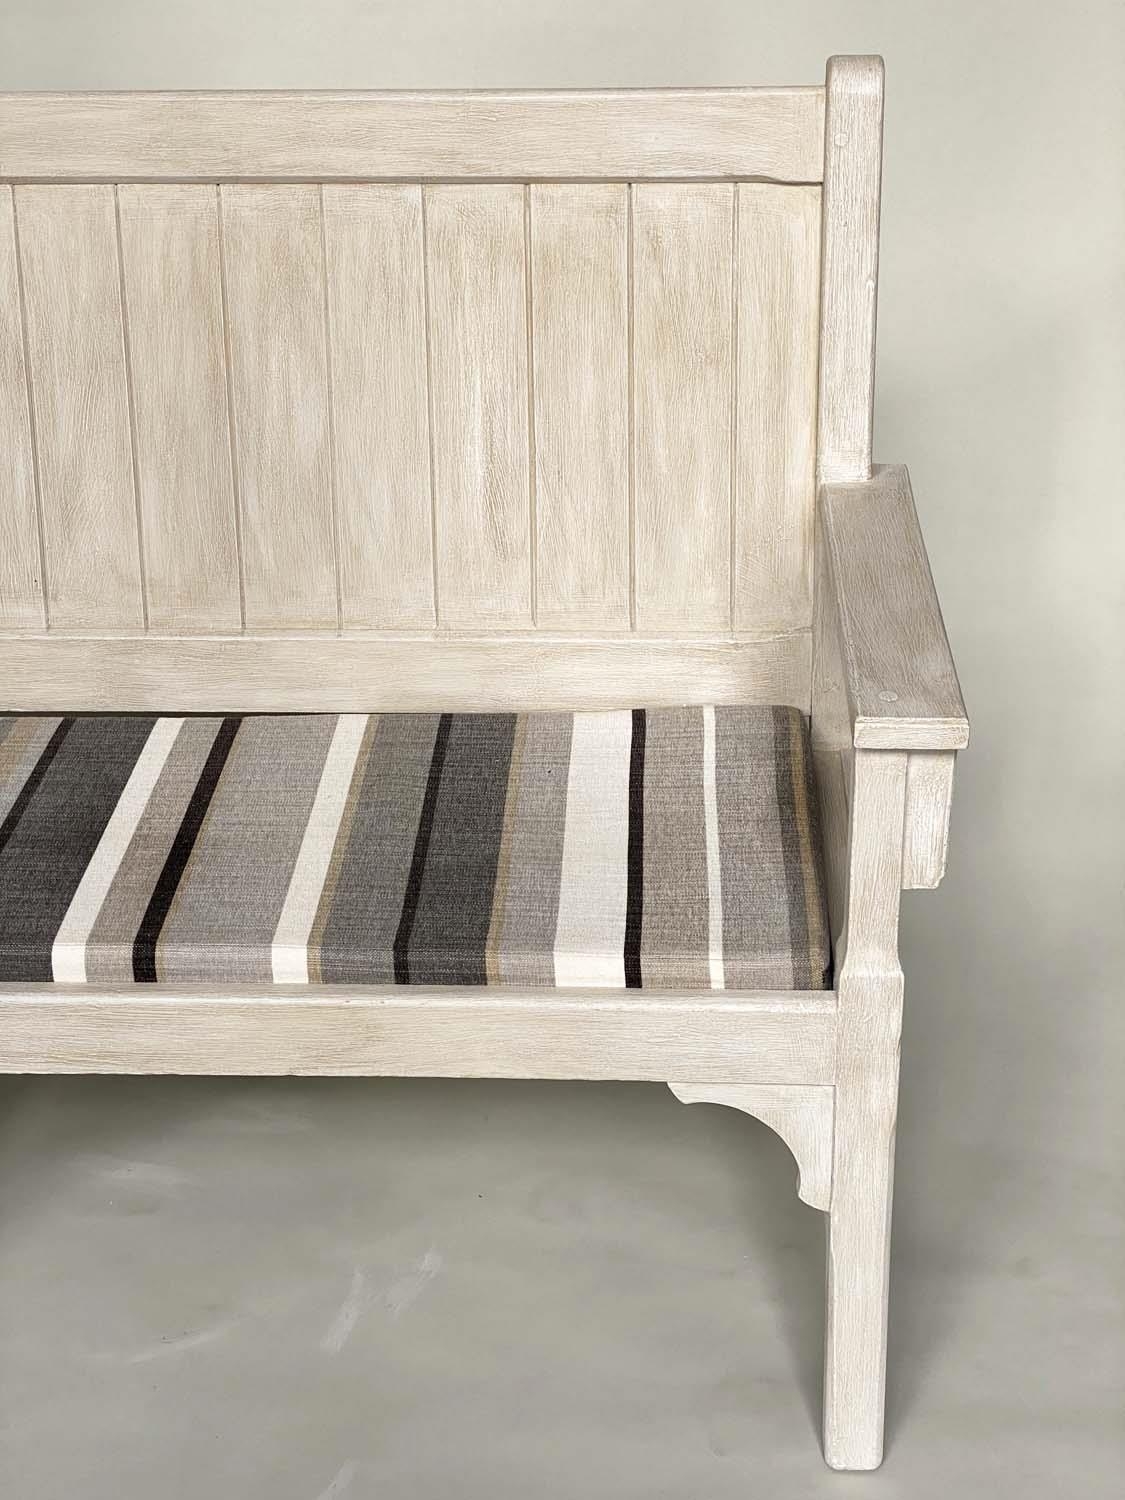 COUNTRY HOUSE BENCH, 189cm W, French style, grey painted, with striped seat cushions and arms. - Image 5 of 6